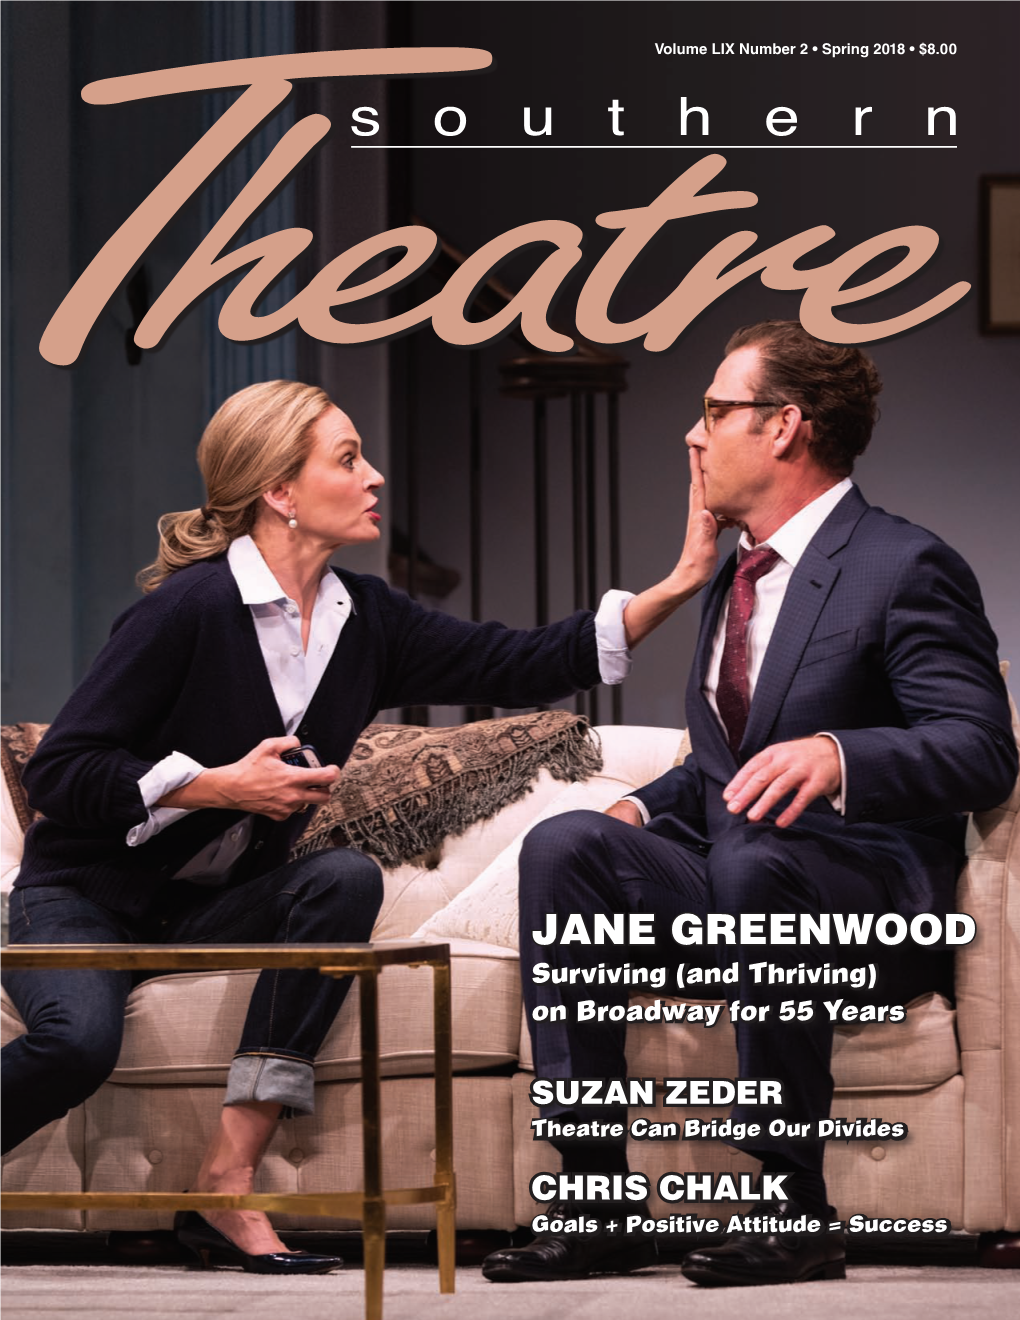 JANE GREENWOOD Surviving (And Thriving) on Broadway for 55 Years